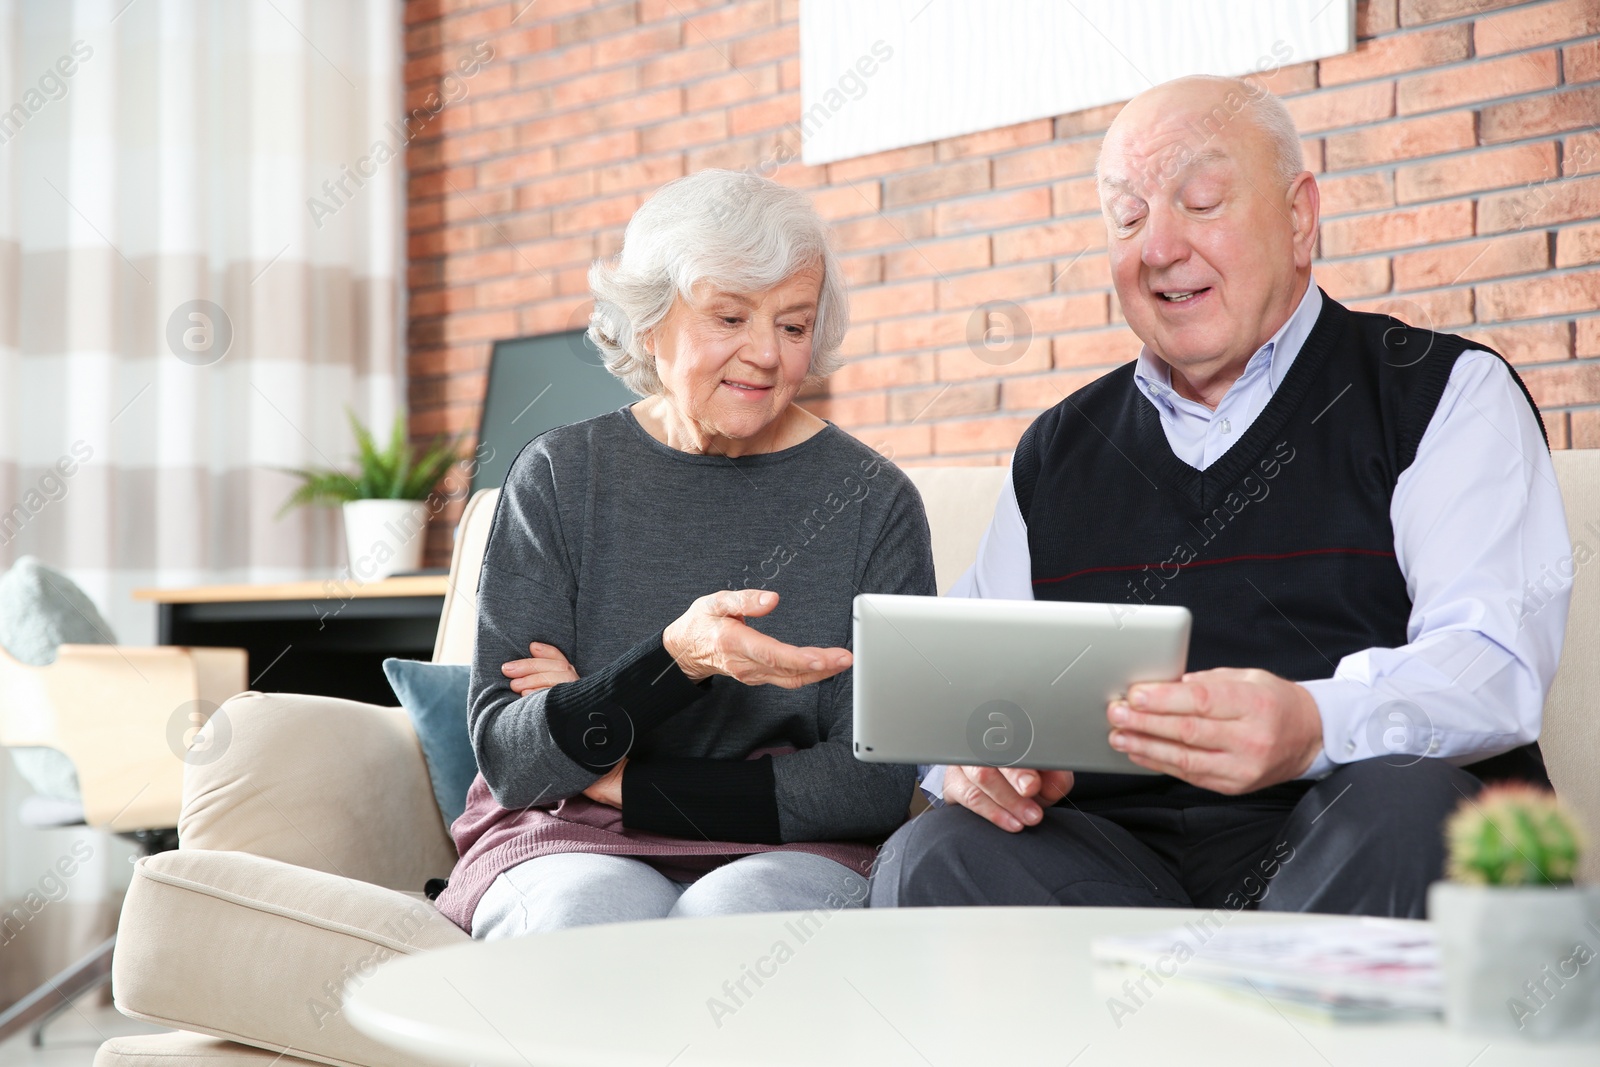 Photo of Elderly couple using tablet PC on sofa in living room